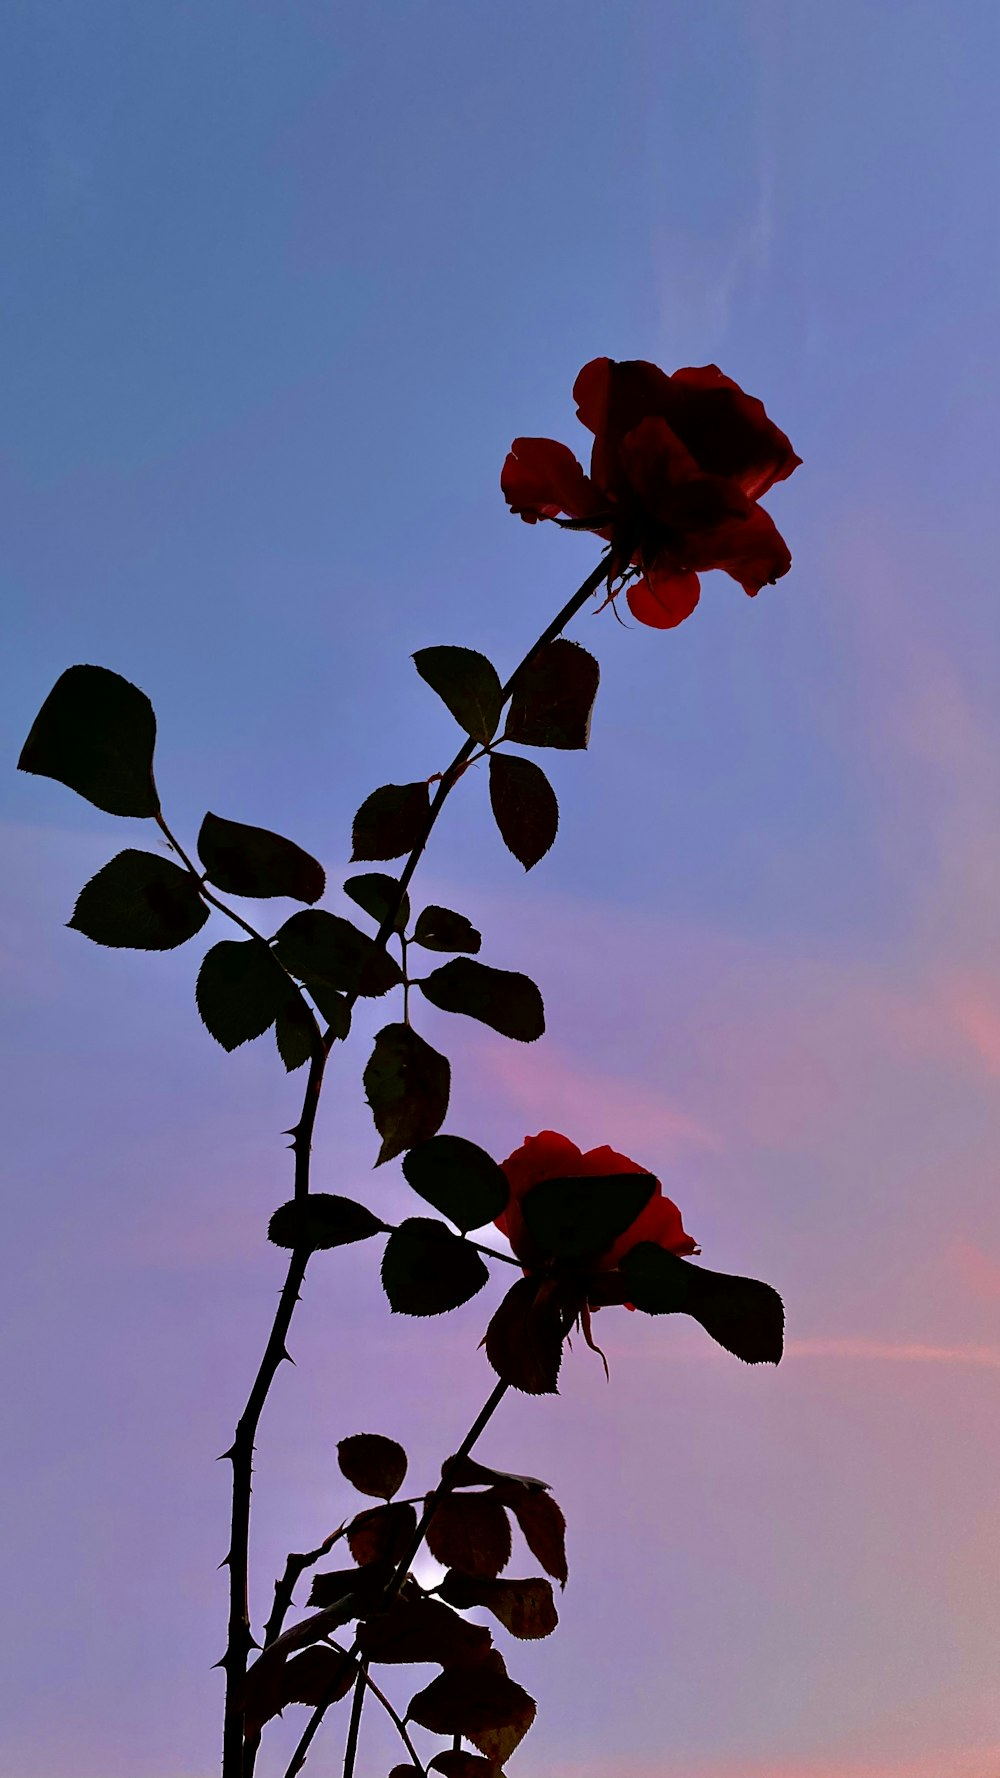 a single red rose on a stem against a blue sky